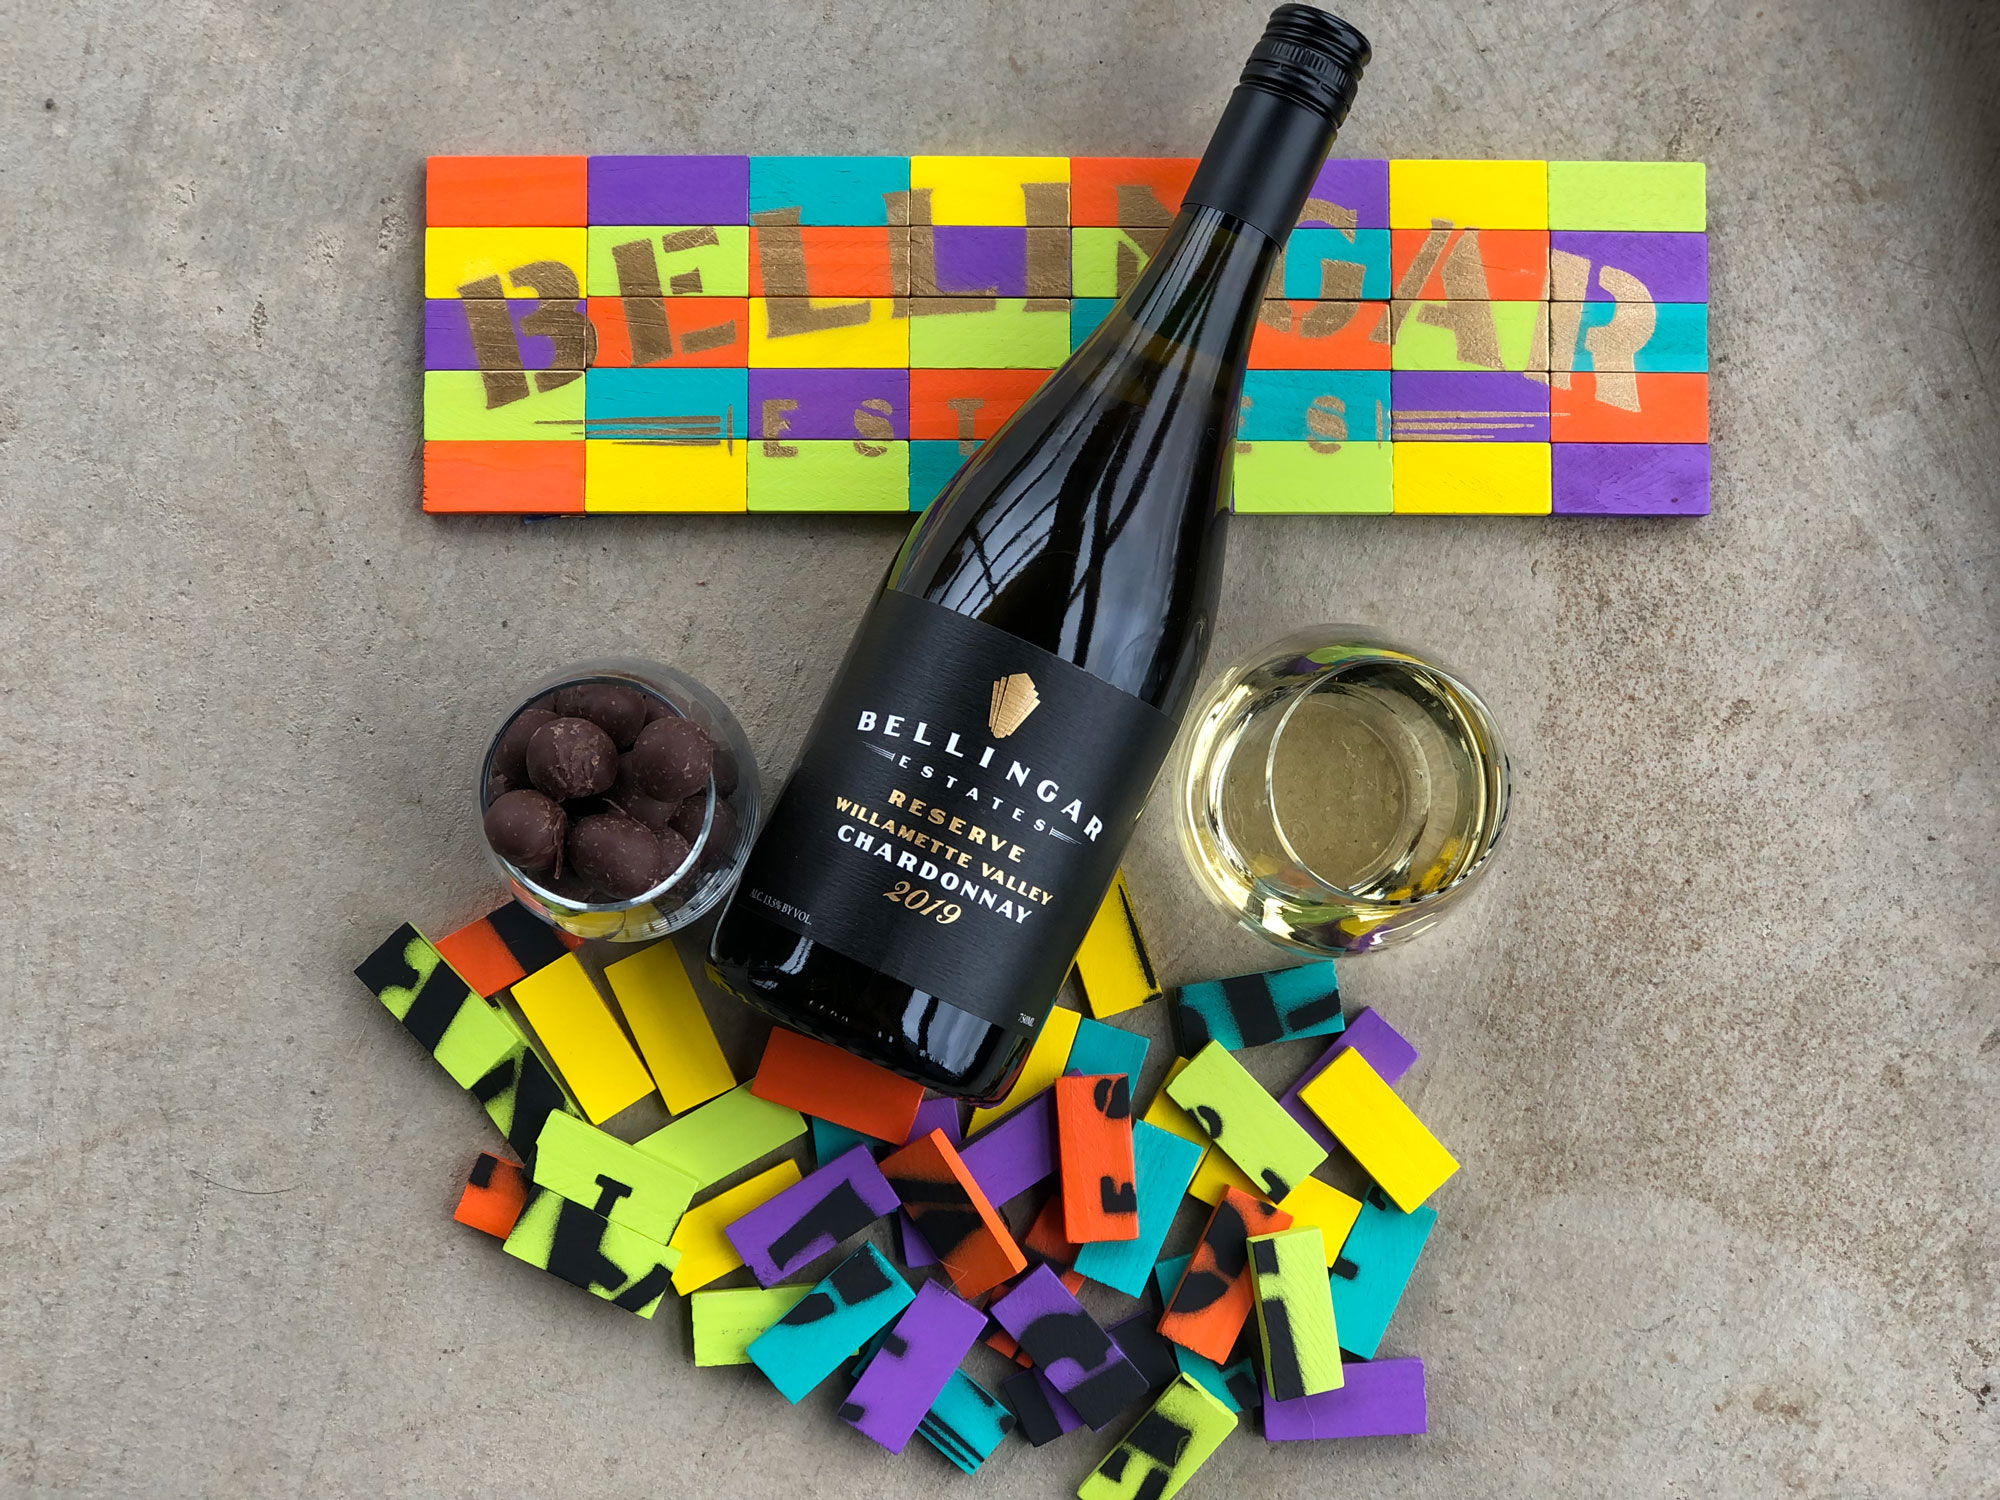 A bottle of Bellingar Estates wine with a colorful sign